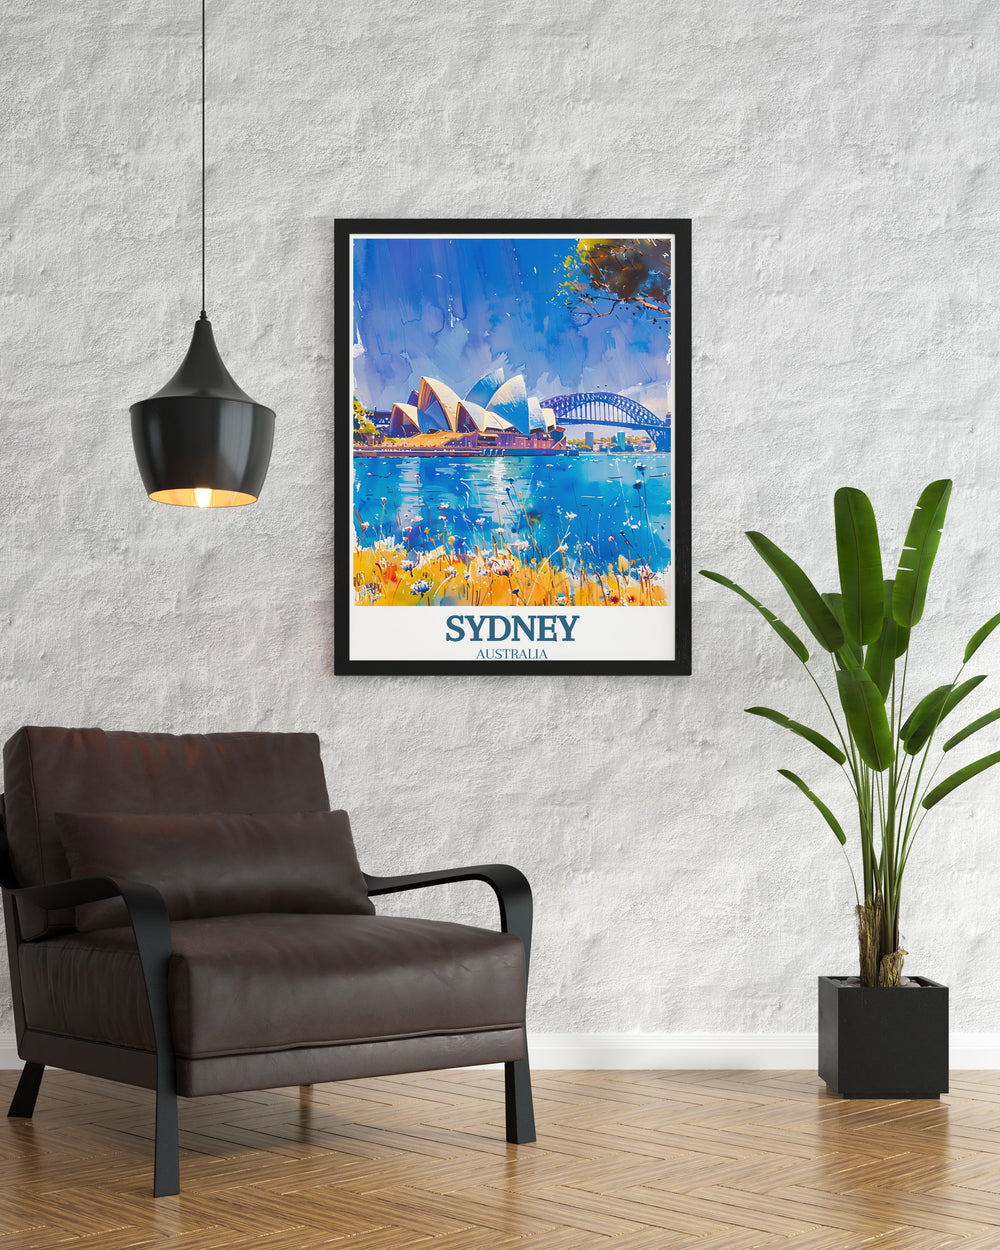 Retro travel poster featuring the Sydney Opera House and Sydney Harbour Bridge in vibrant colors an ideal piece of Australia art for decorating your living space and celebrating the charm and elegance of Sydneys most famous landmarks